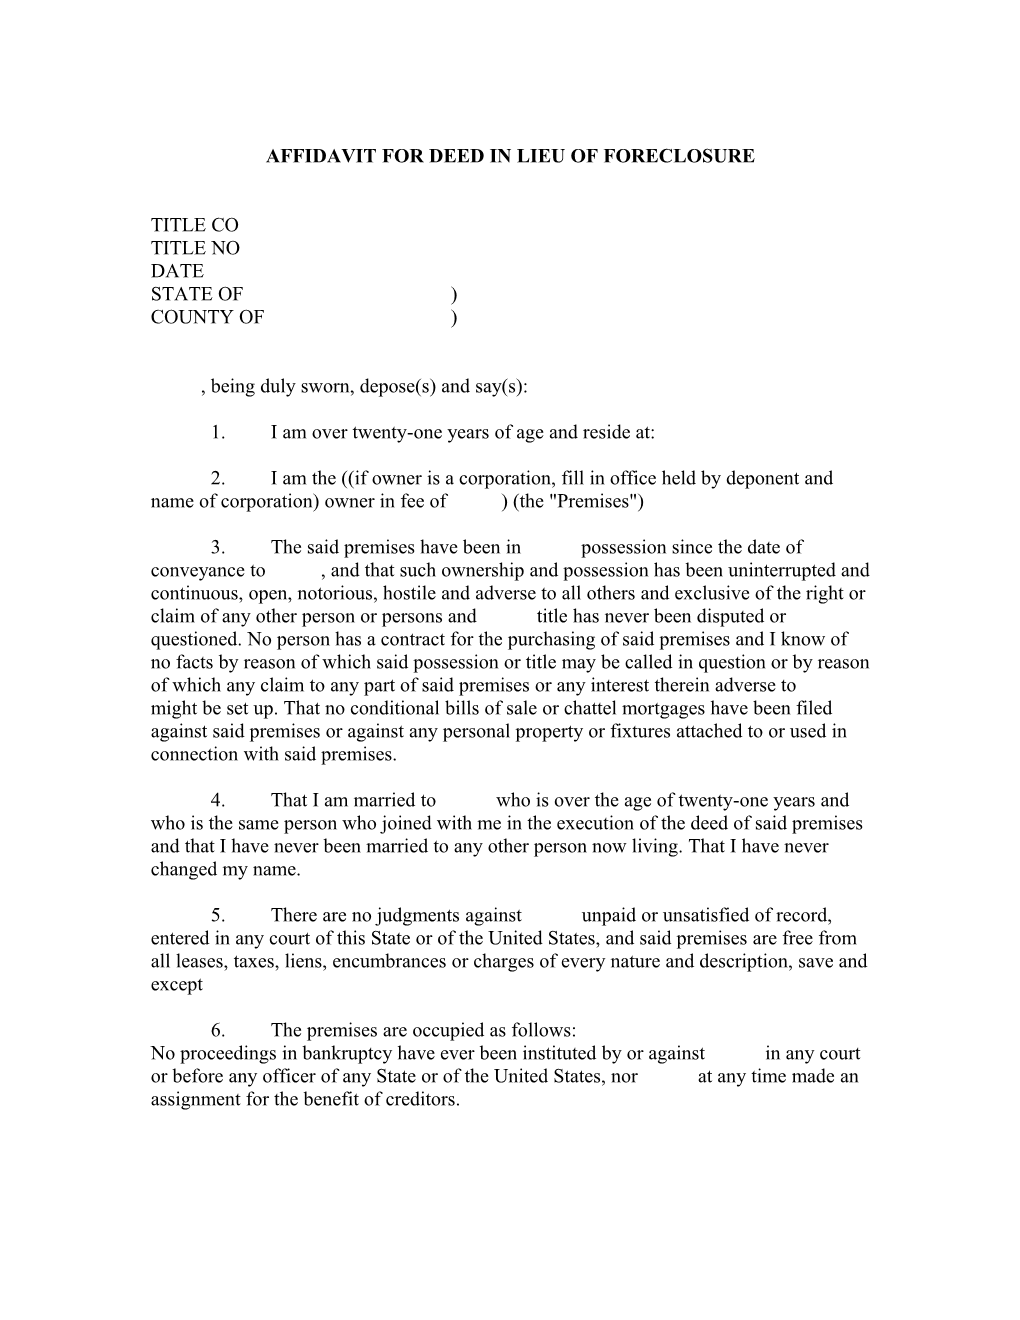 Affidavit for Deed in Lieu of Foreclosure